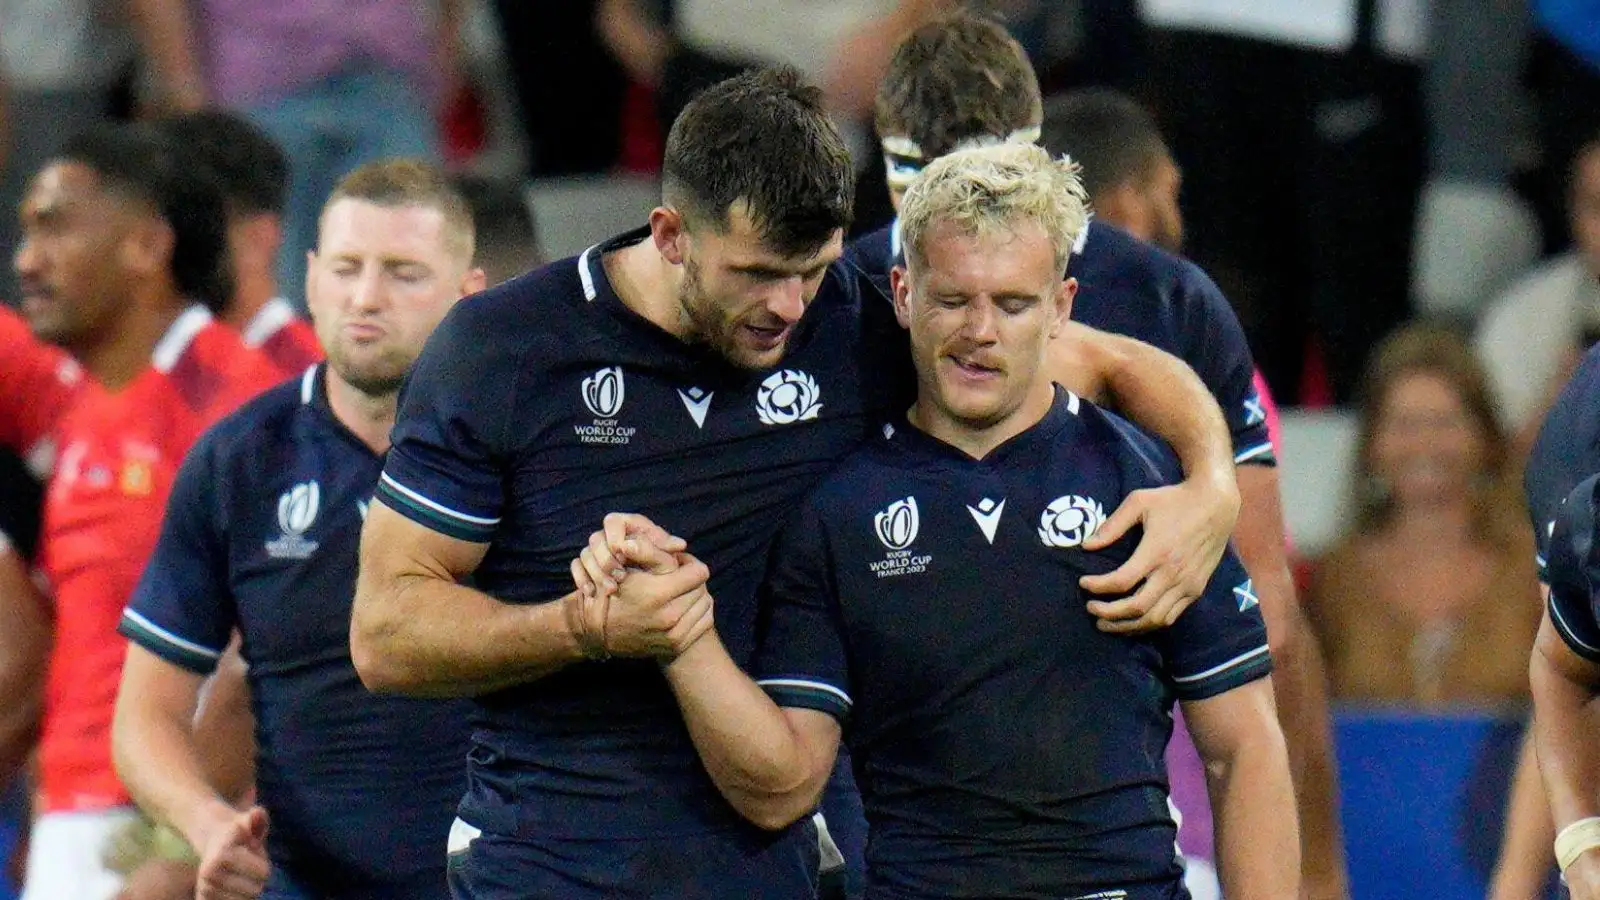 Scotland's Darcy Graham, right, celebrates with teammate Blair Kinghorn after marking a try during the Rugby World Cup Pool B match between Scotland and Tonga